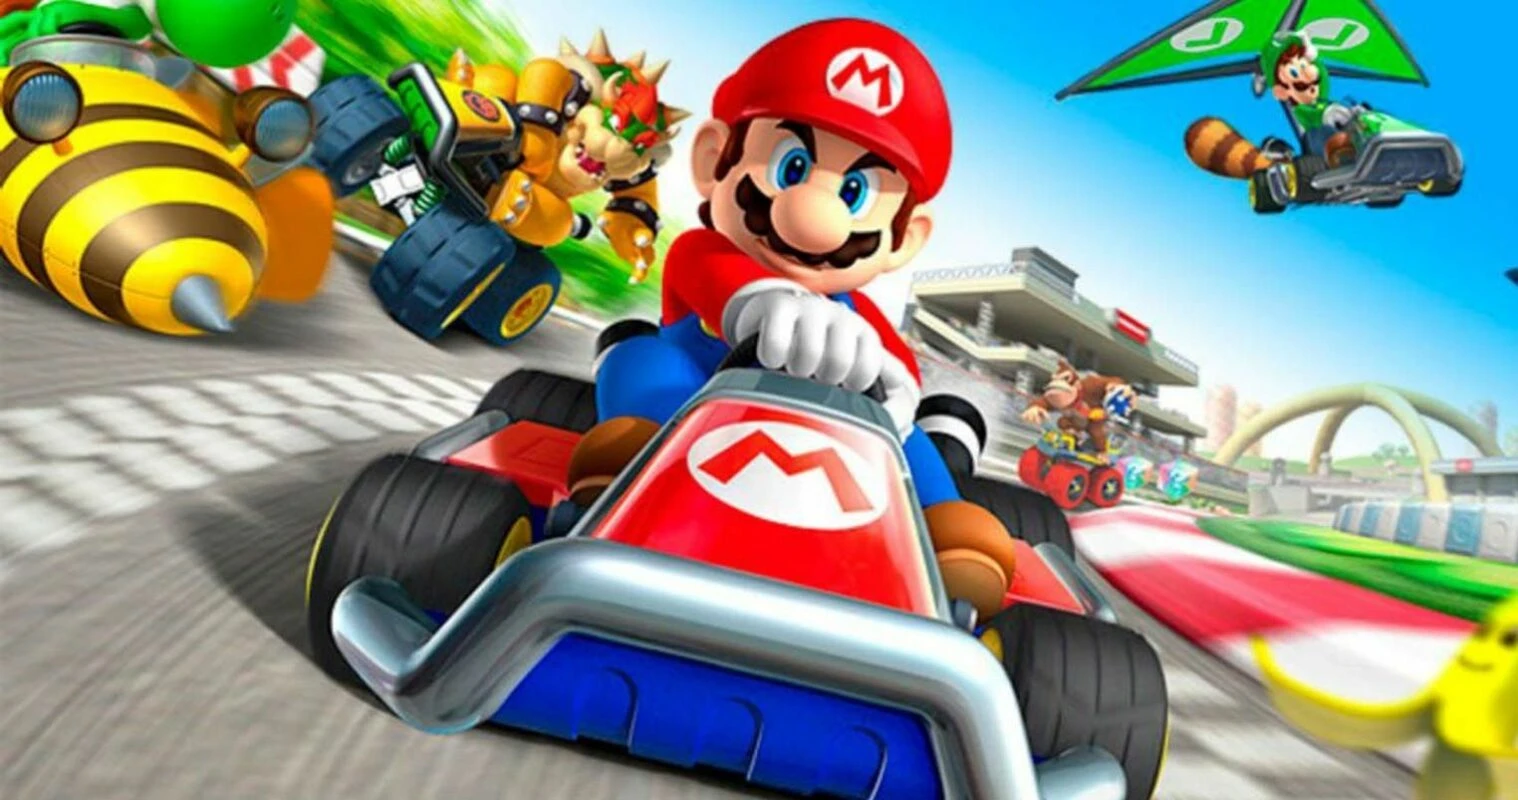 Mario Kart Tour: the most downloaded mobile game in September